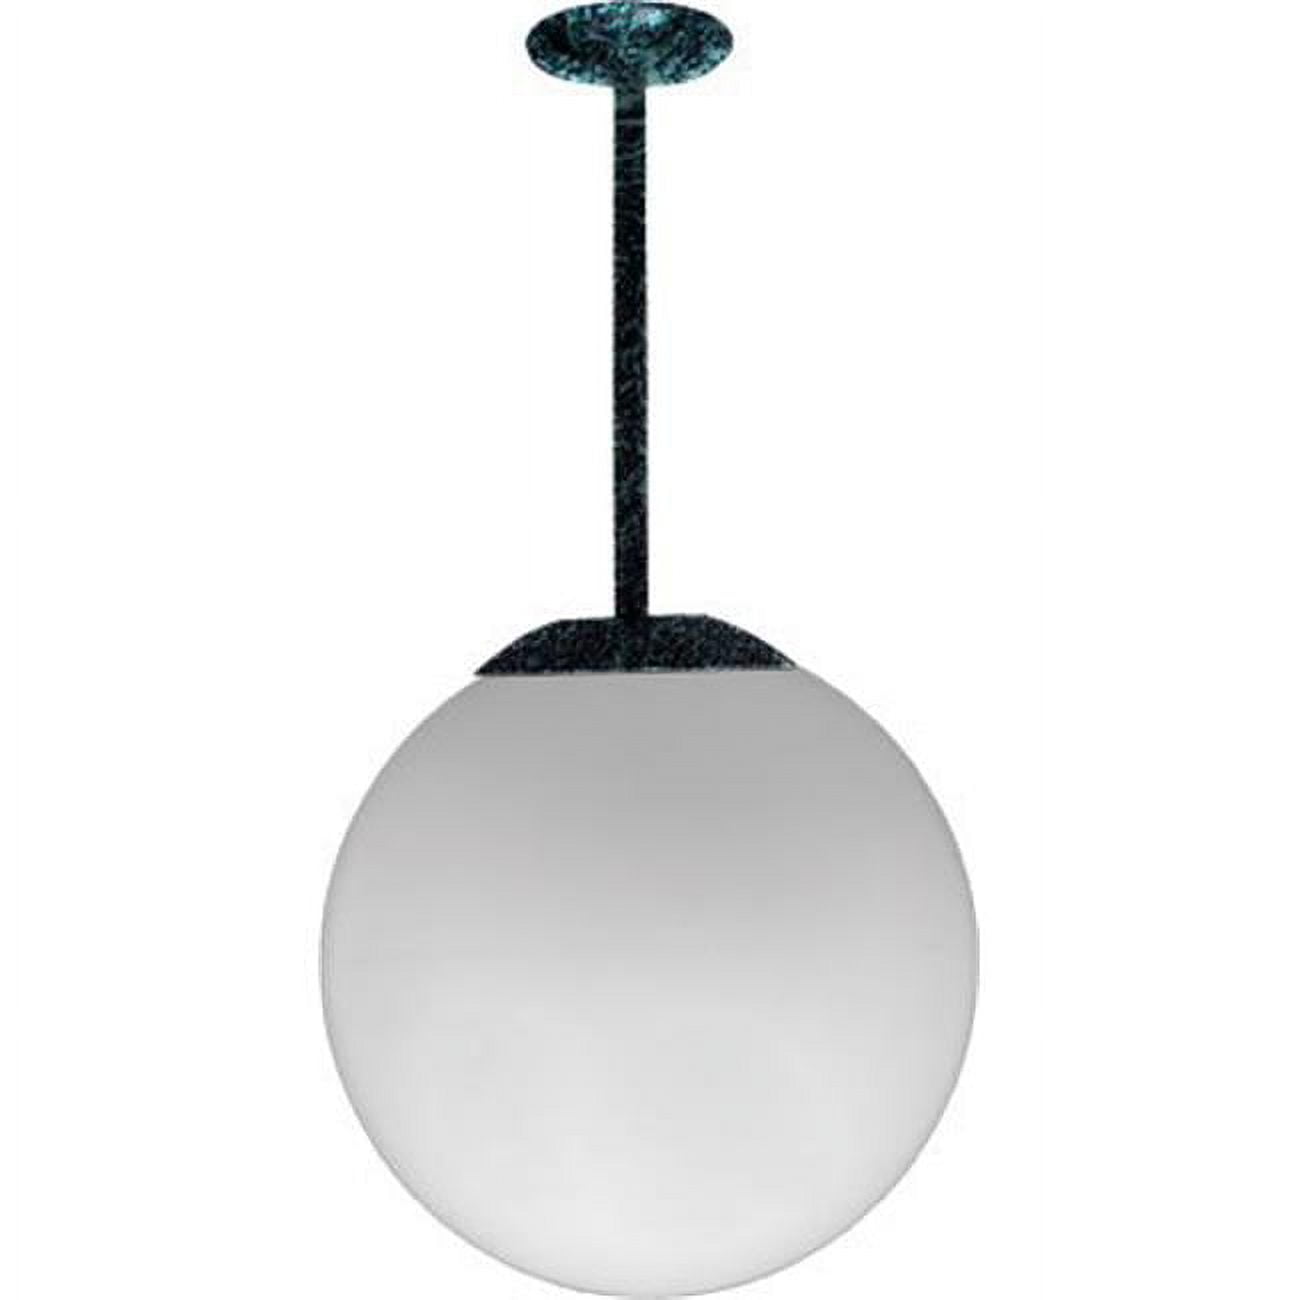 D7517-12-vg 18 In. 120 V 70 Watts Ceiling Globe Fixture 12 In. Drop With High Pressure Sodium Lamp, Verde Green